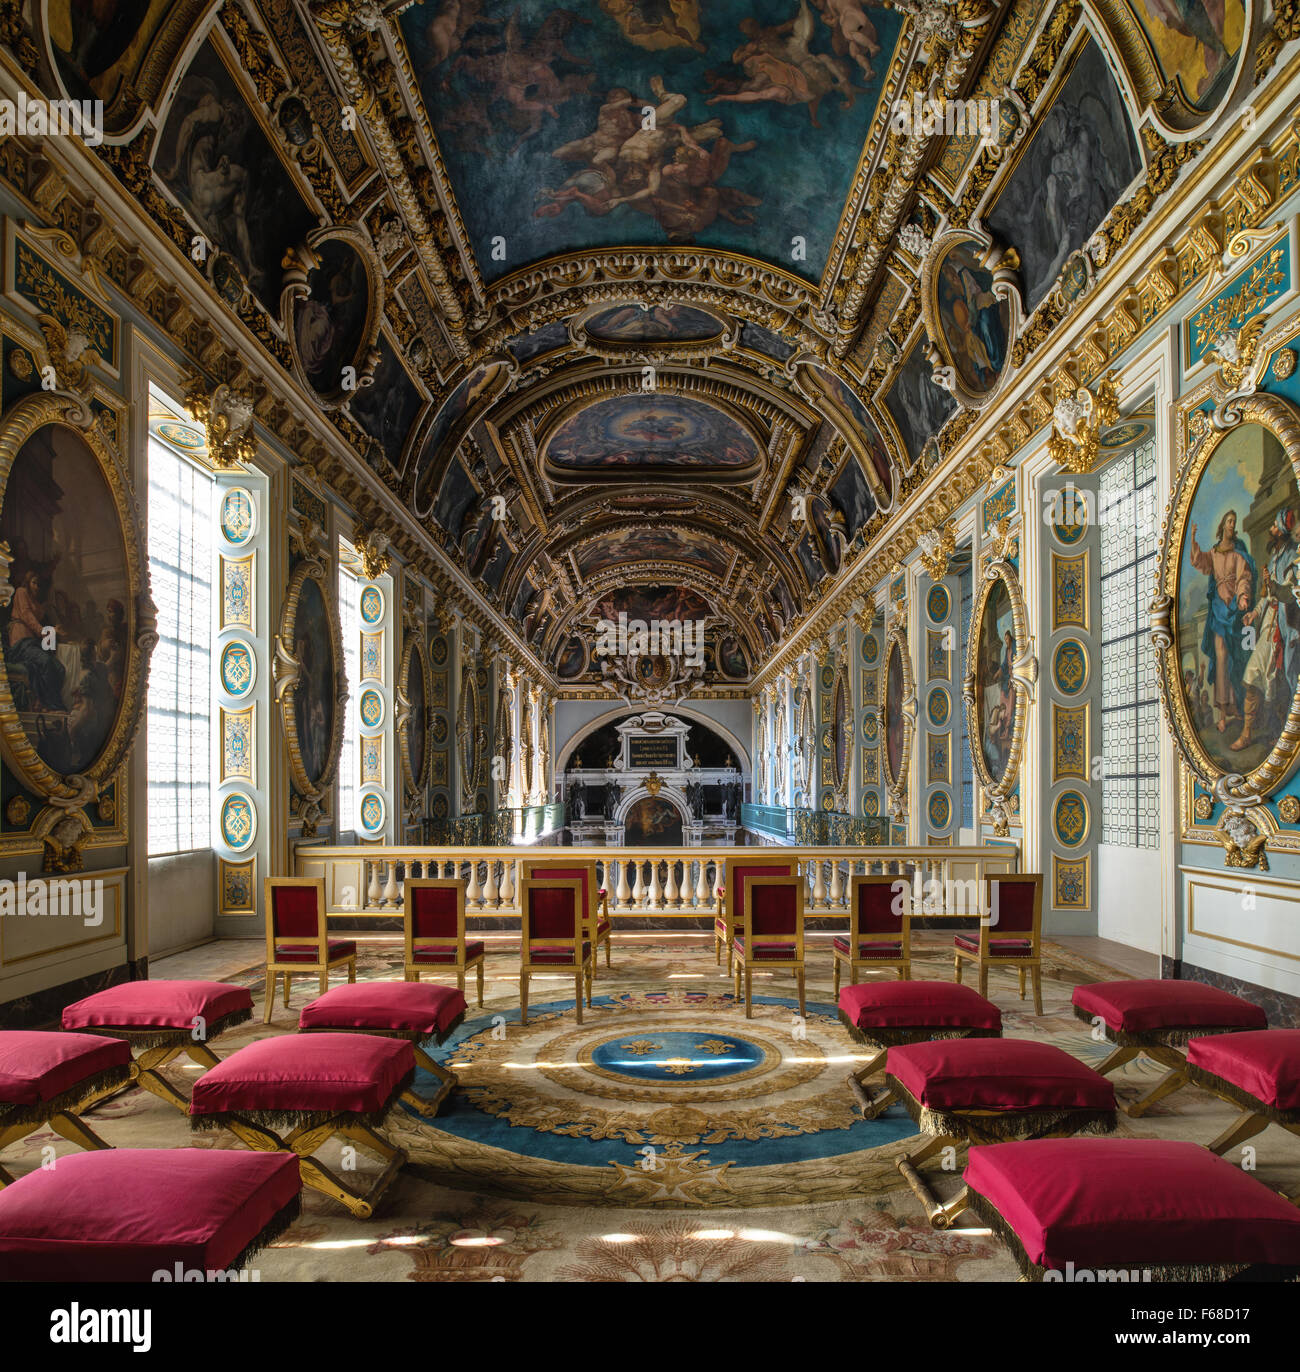 Fontainebleau, France - 16 August 2015 : Interior view of the